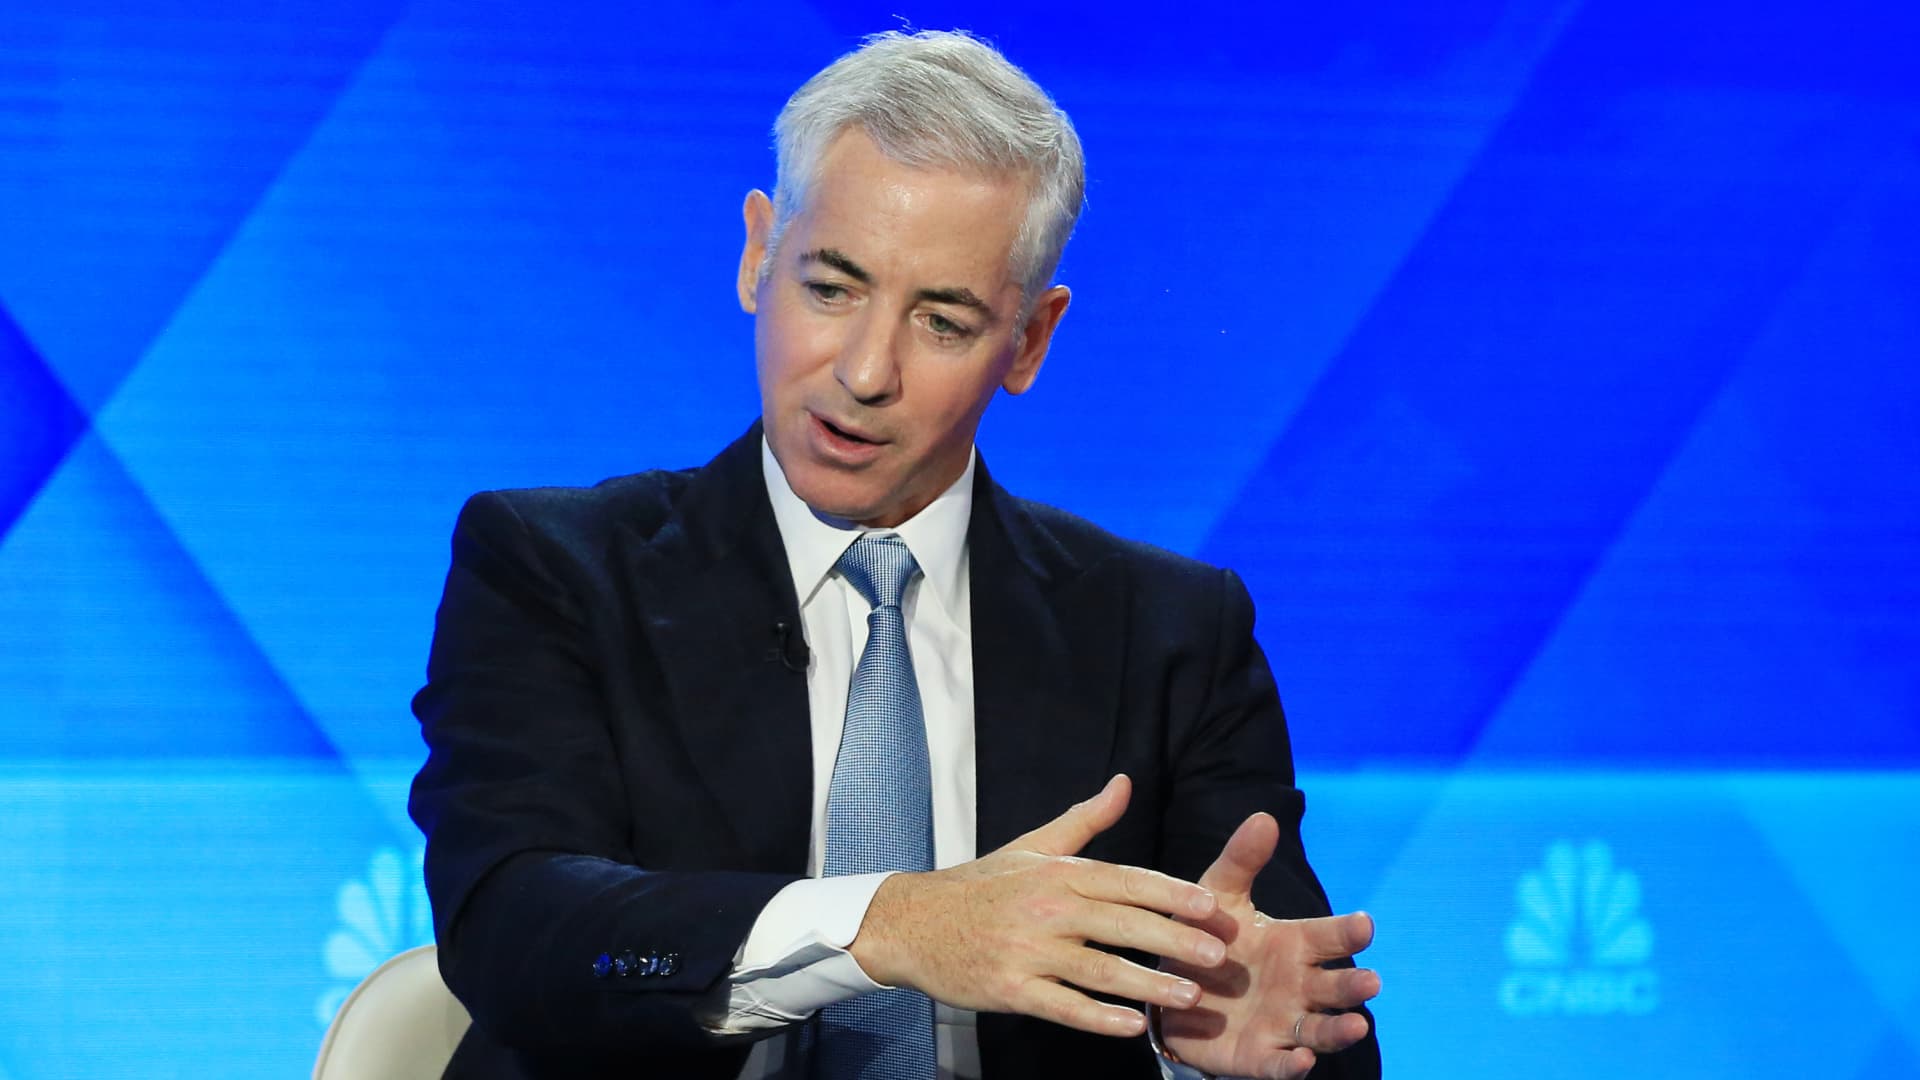 Bill Ackman says the economy is starting to slow and the Fed is likely done hiking